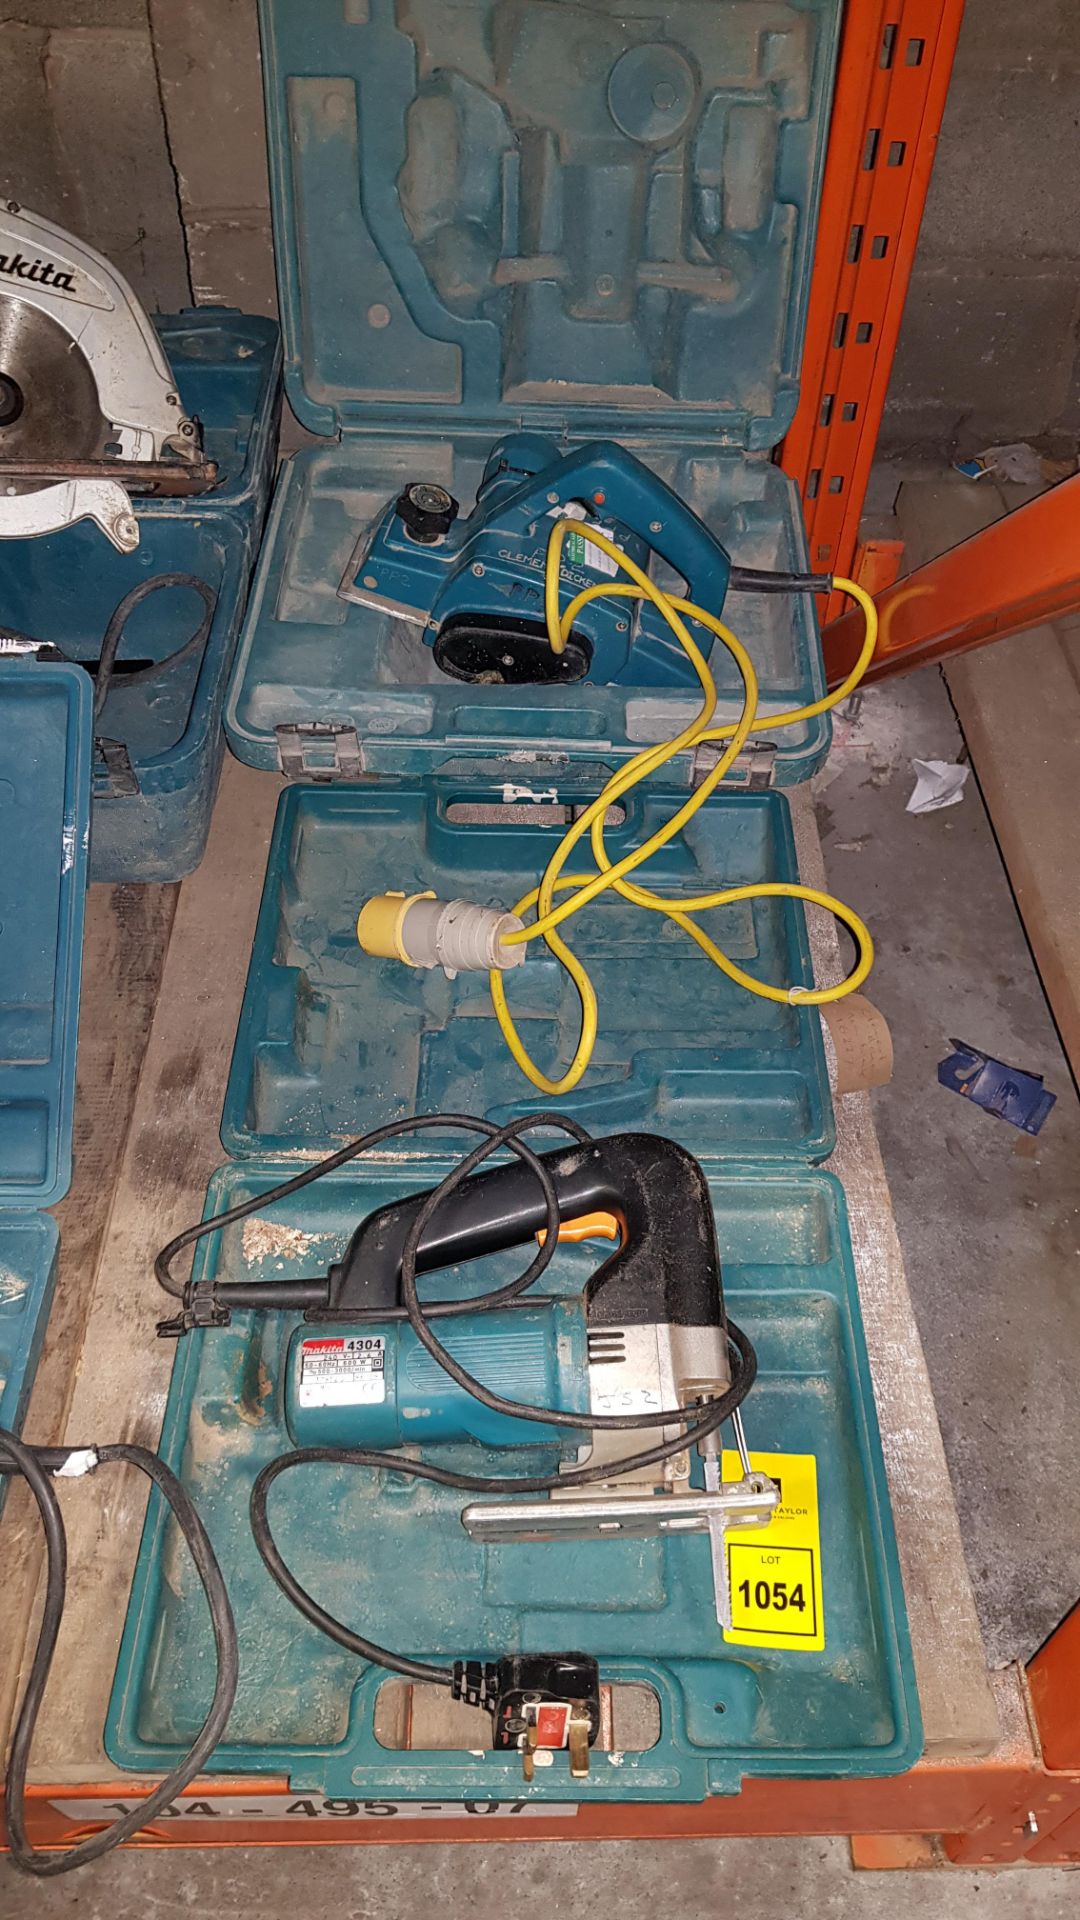 2 PIECE MIXED TOOL LOT CONTAINING MAKITA JIG SAW ( 4304) AND 1 X MAKITA PLANER ( 1923 H ) - PLEASE